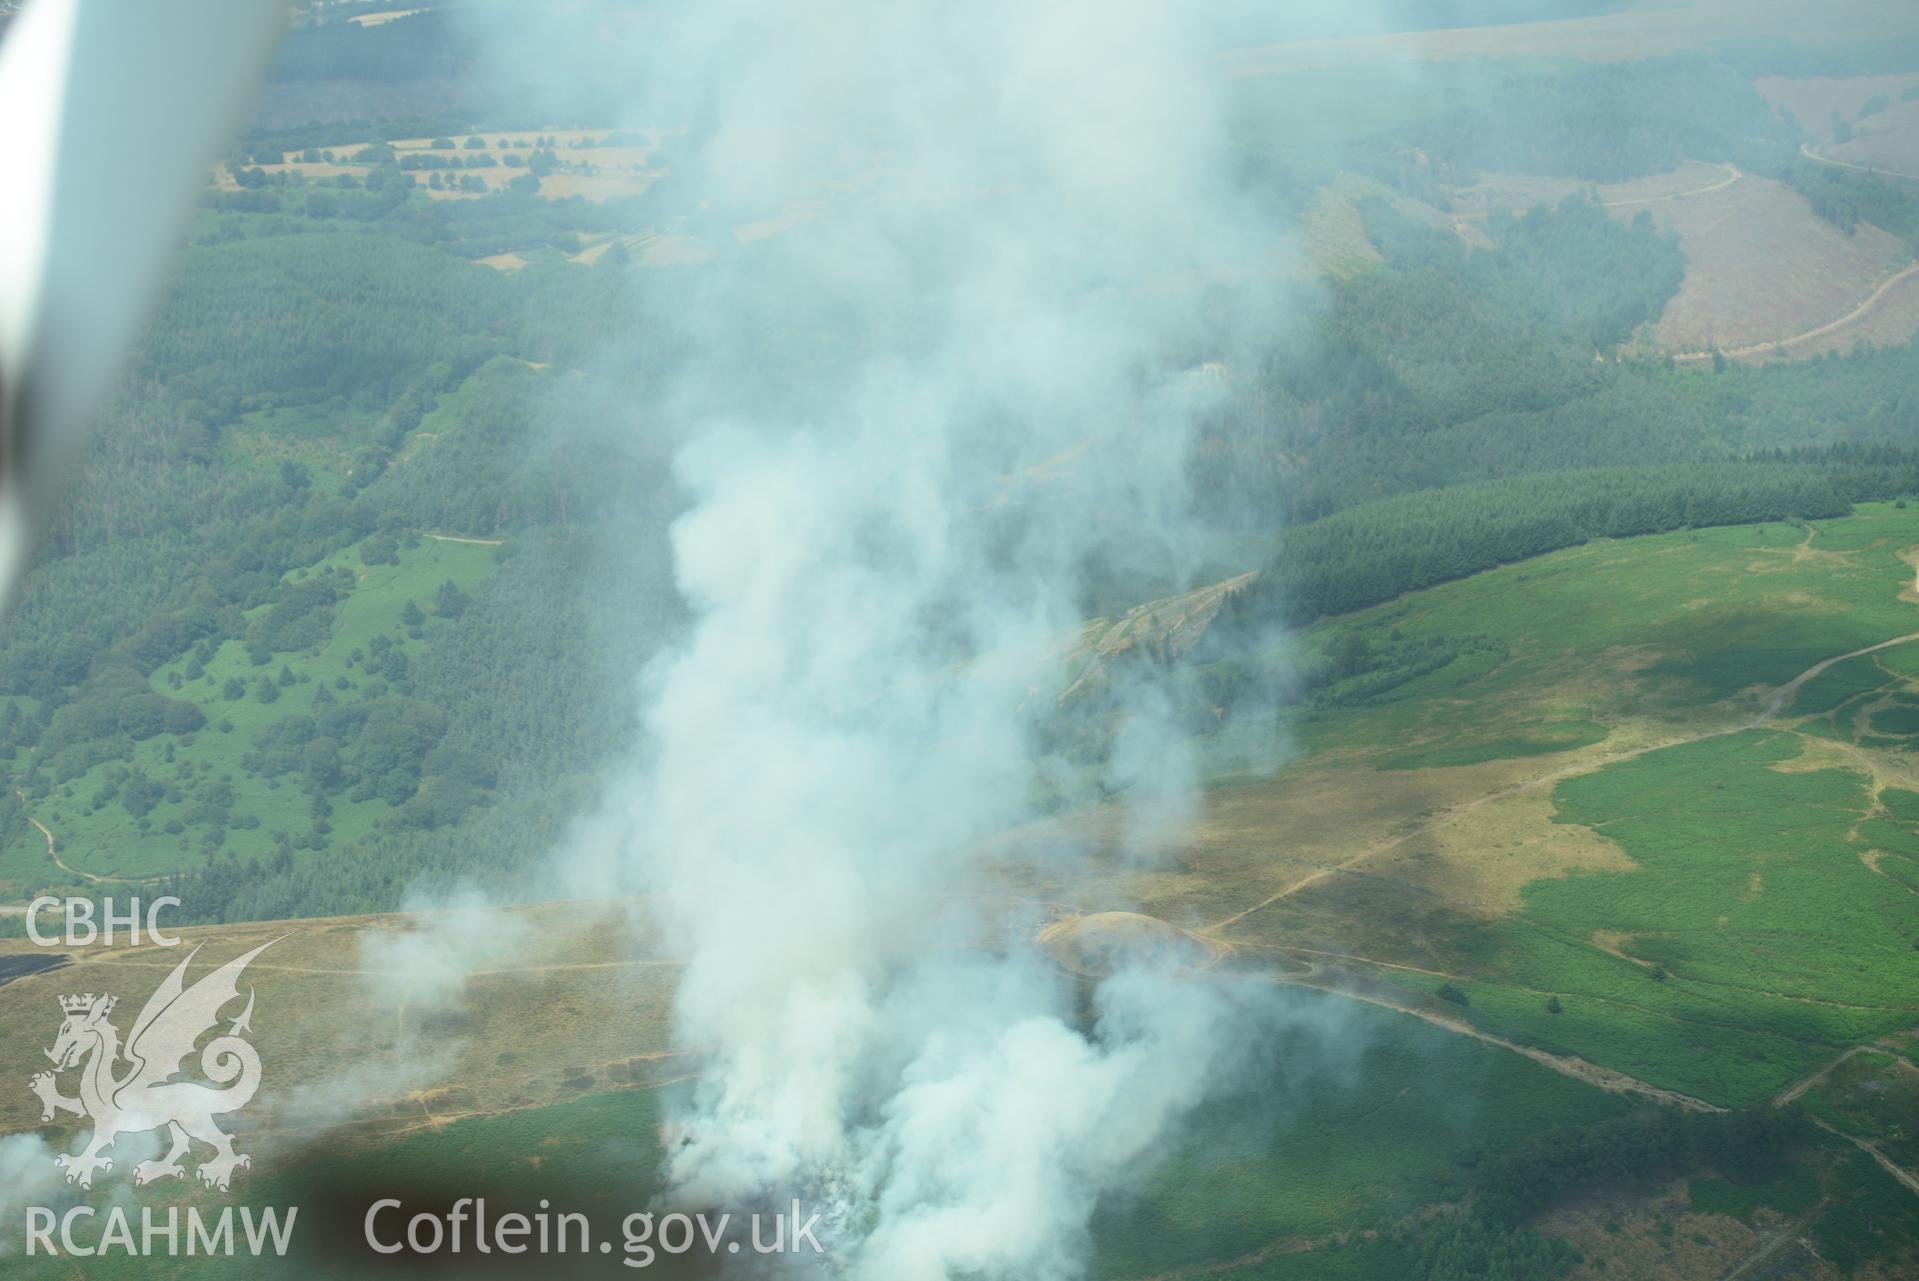 Royal Commission aerial photography of Twmbarlwm motte and bailey during a fire taken on 19th July 2018 during the 2018 drought. The photograph is taken through the window of the aircraft due to the pilot following a flight path to avoid the smoke.